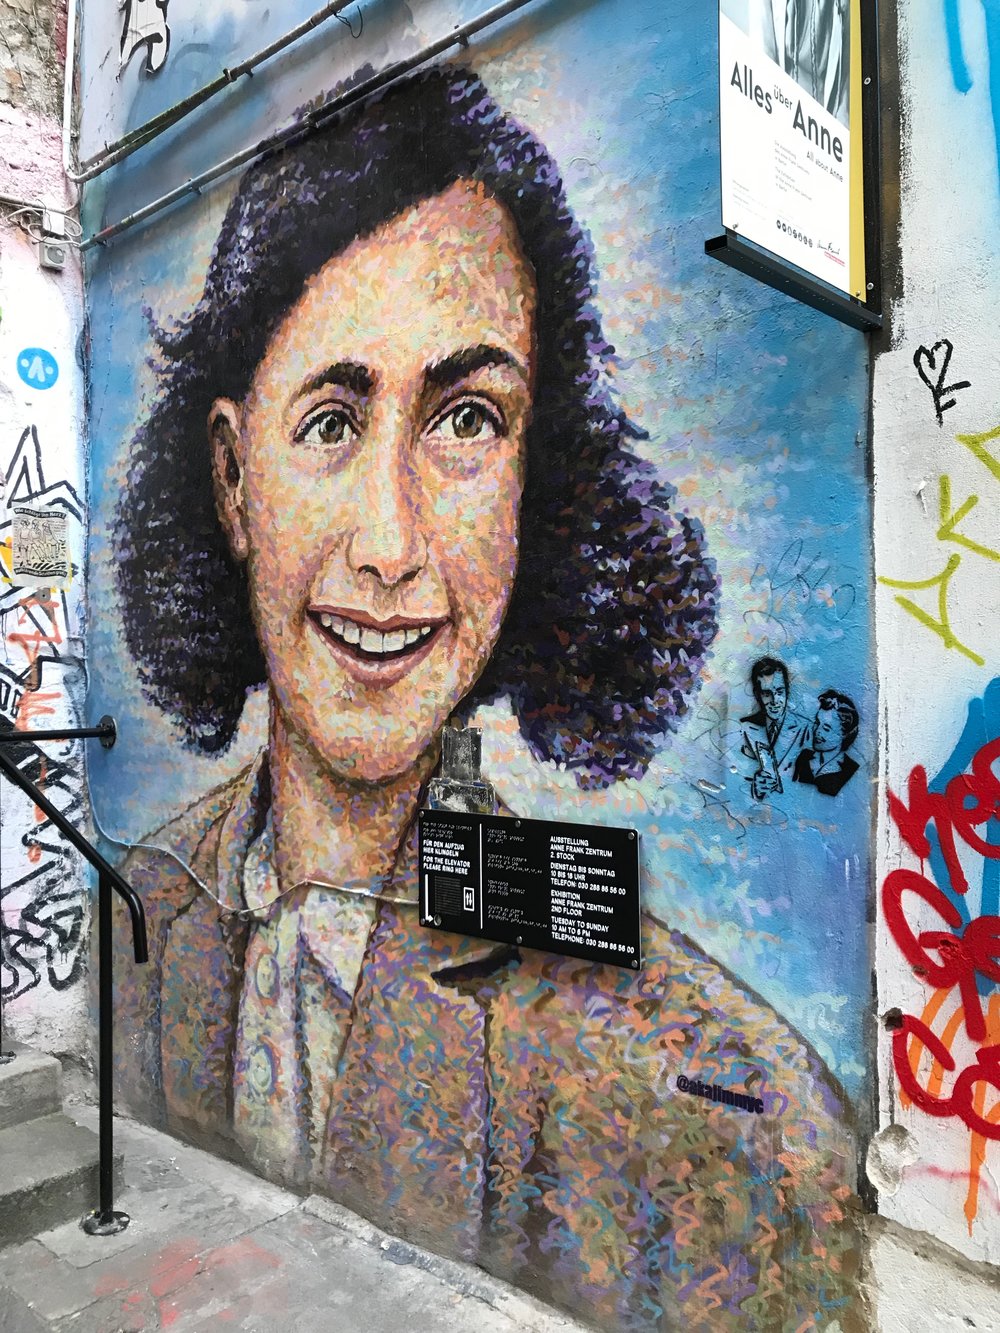  This mural - with a smiling Anne Frank - was painted by a  street artist from London  in conjunction with the  Anne Frank Zenter  in Berlin. 